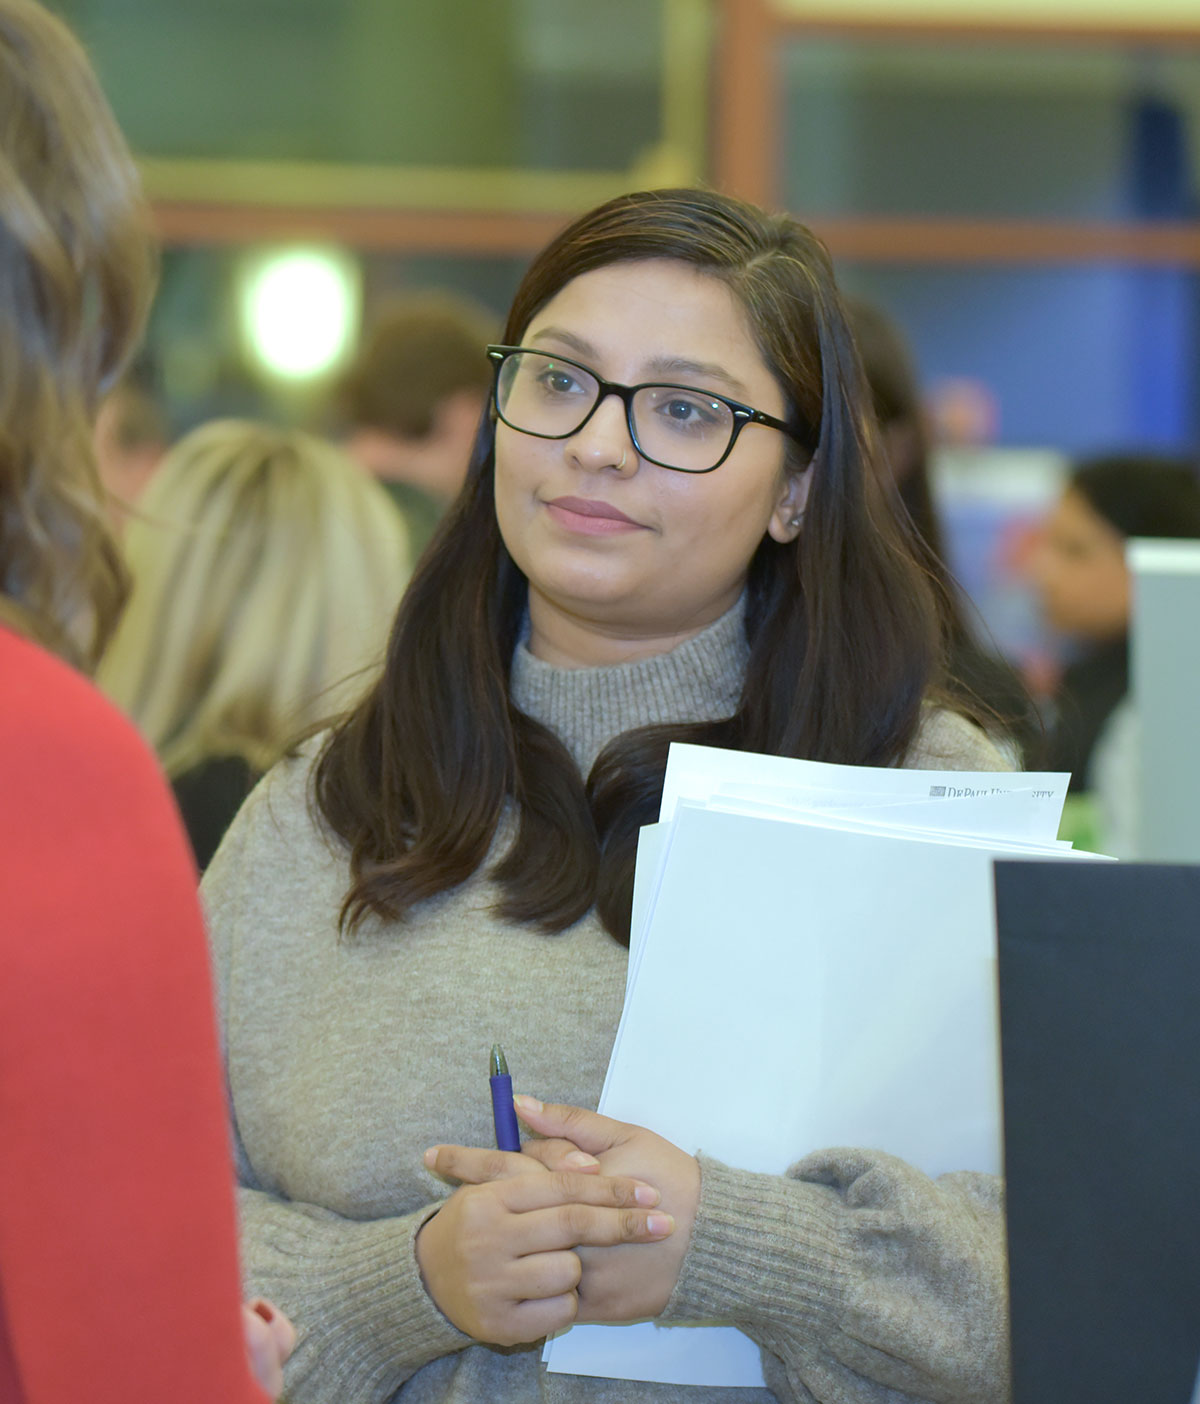 Student at Digital Marketing Career Networking Event